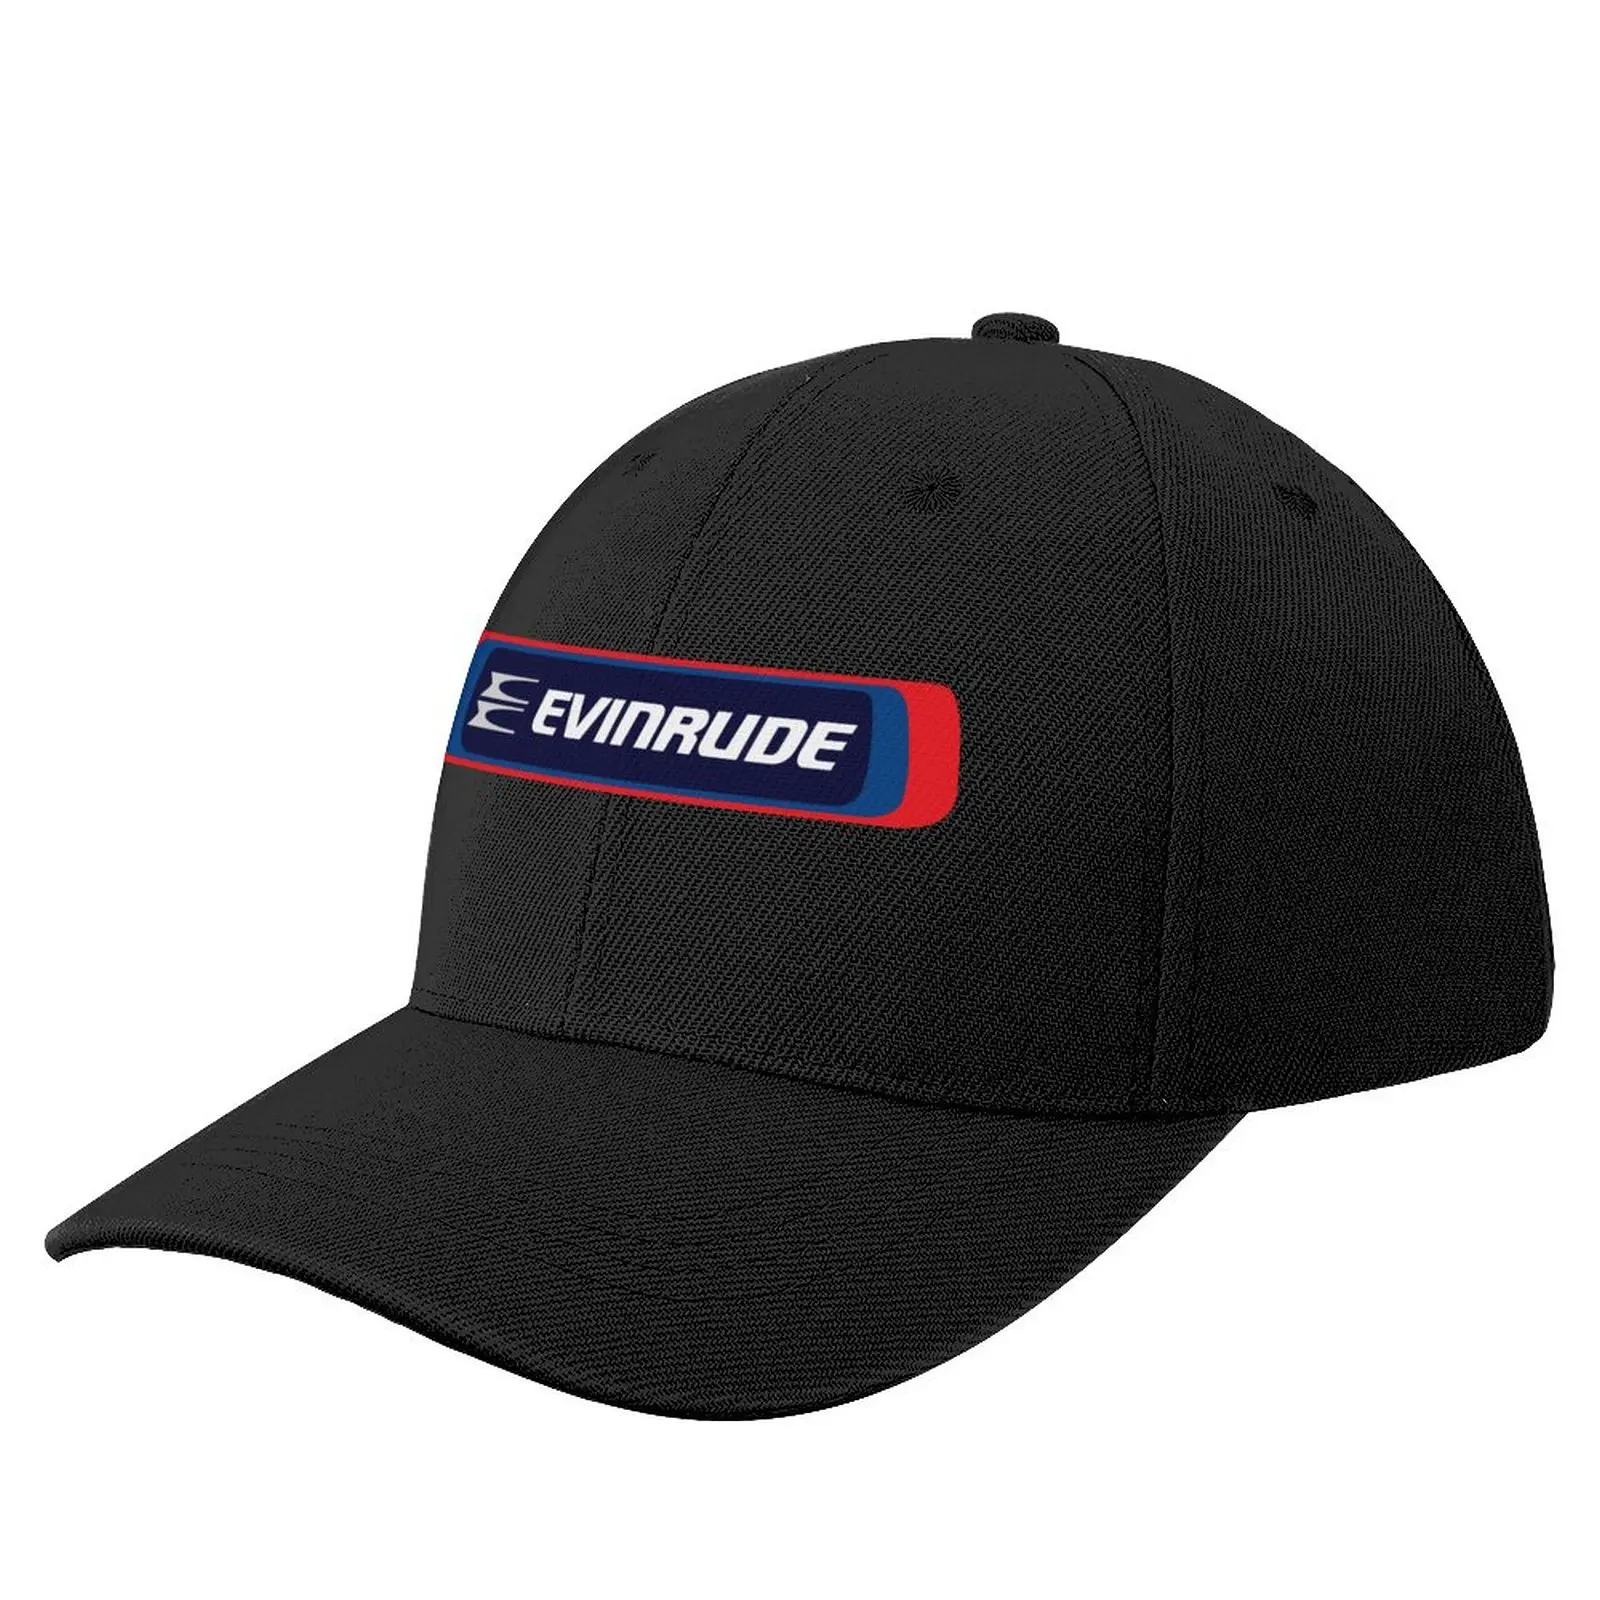 

Vintage Evinrude Outboards Shirt Baseball Cap New In Hat black Mountaineering Luxury Woman Cap Men's